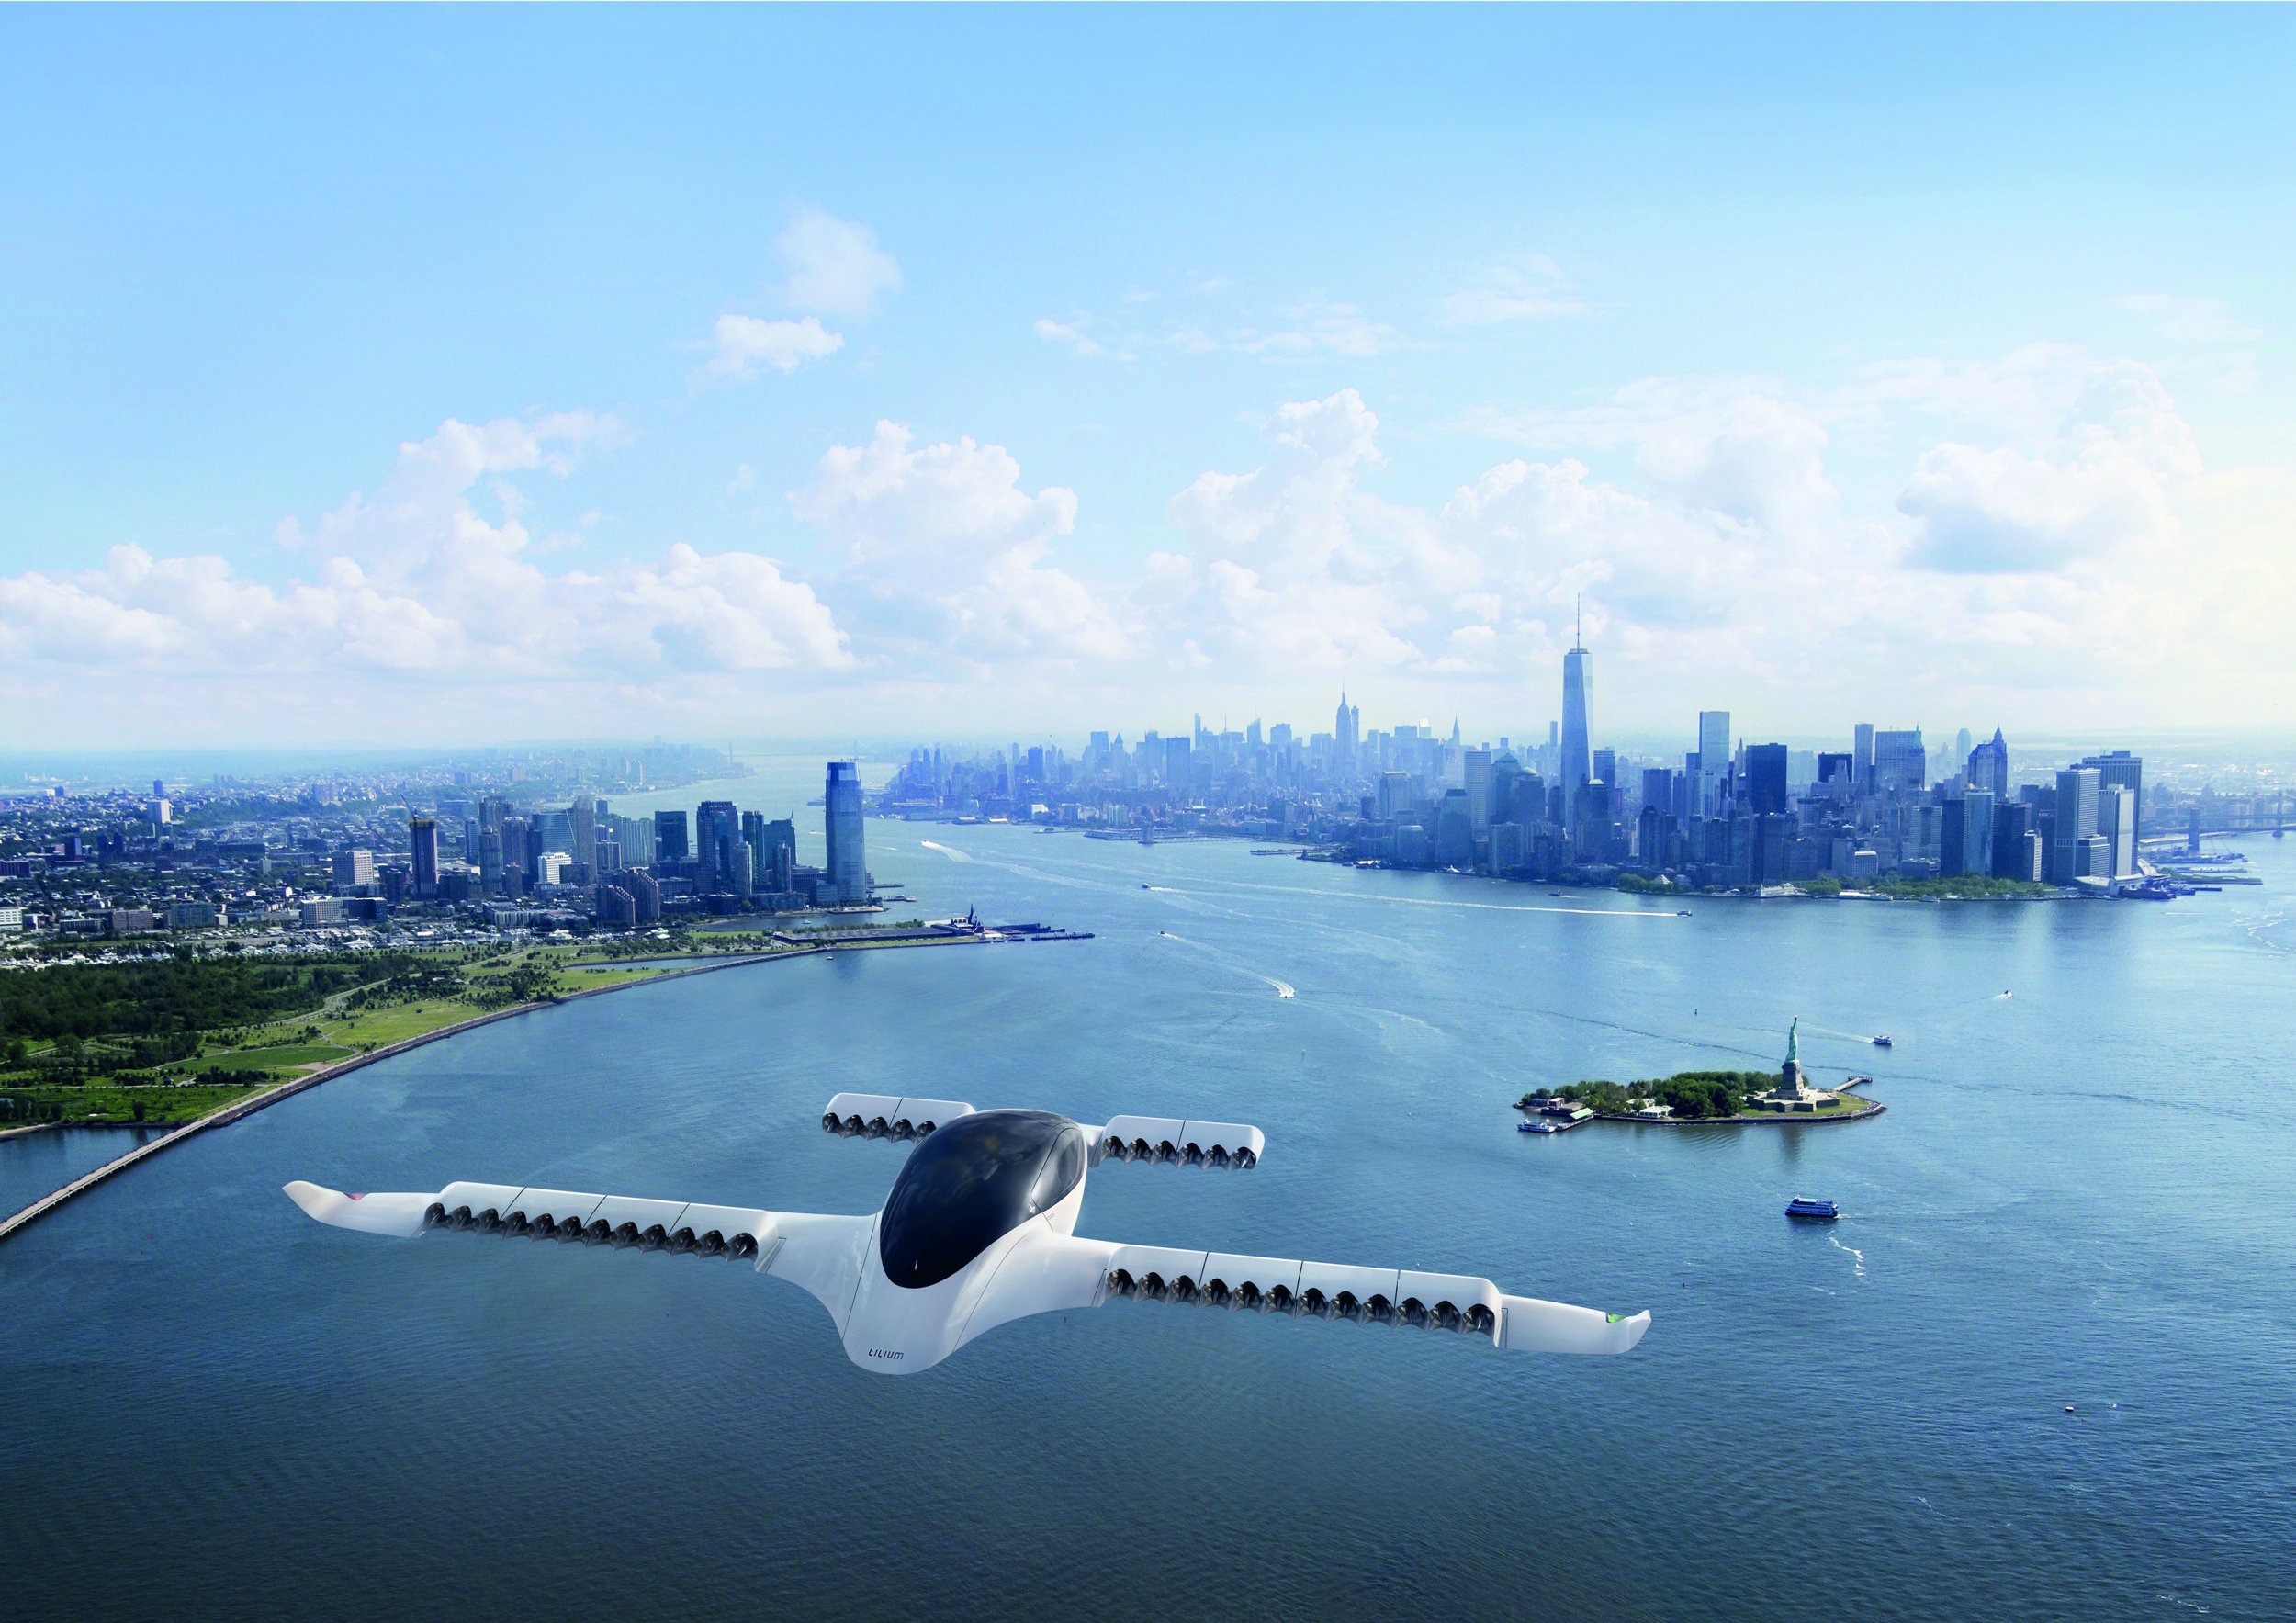 Startup To Launch Flying Taxis In New York By 2025, Will Beat NYC